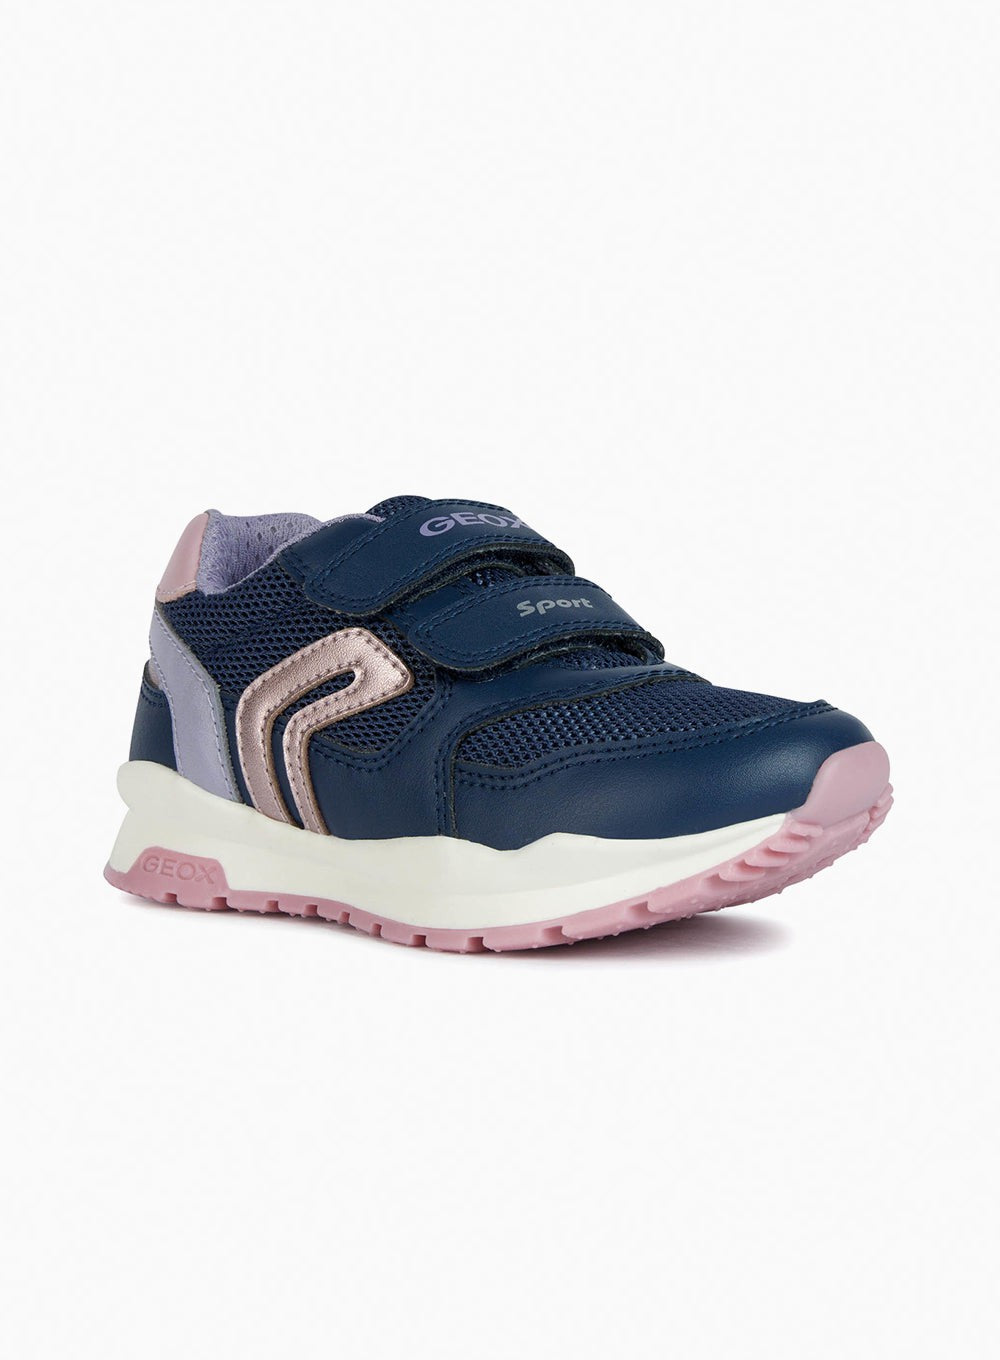 Geox Jr Pavel Girl Trainers in Light | Trotters London